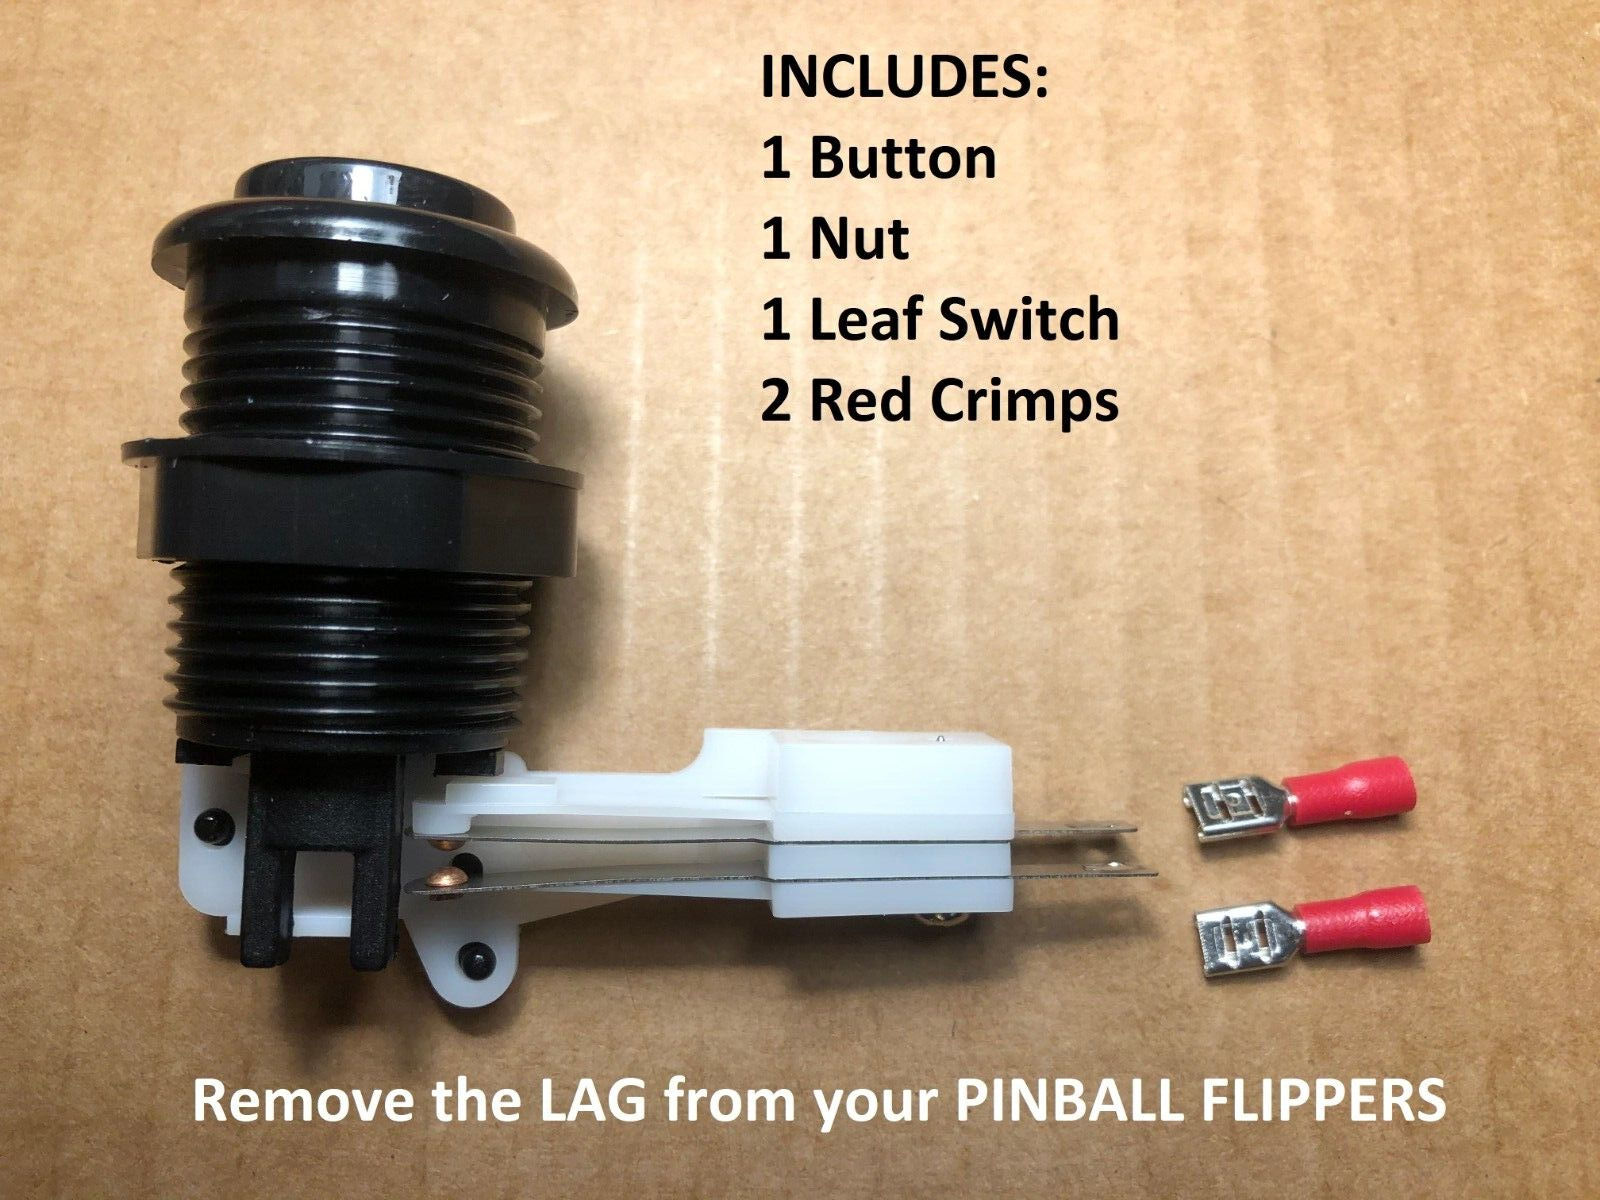 Atgames Legends Pinball LEAF SWITCH & PUSH BUTTON Replacement flippers ALP